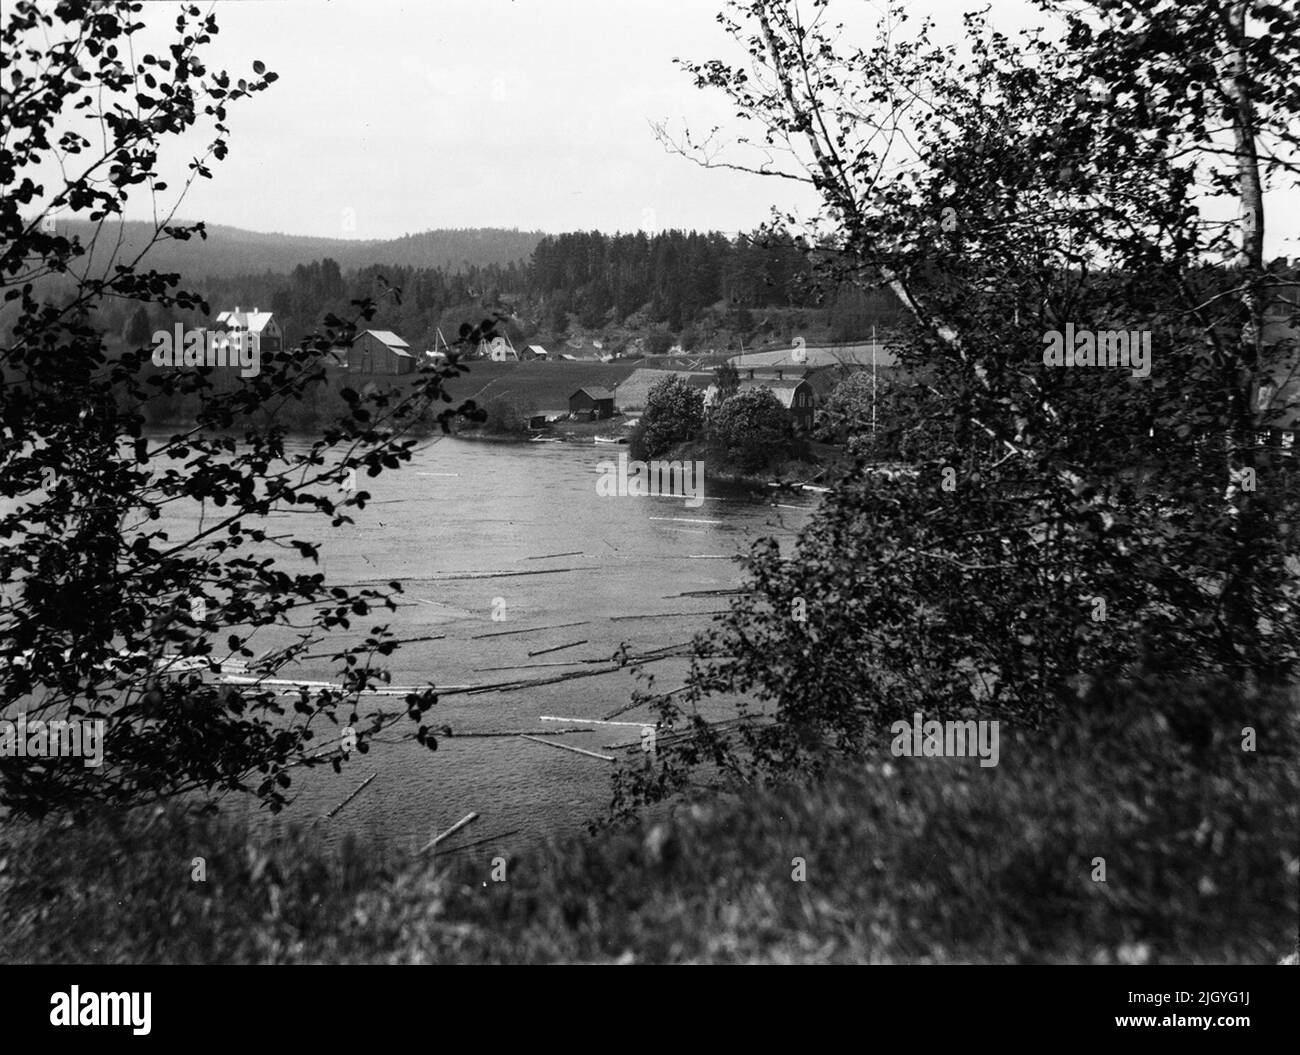 View of the river, probably Medelpad. Josef Ärnström's image collection was acquired by the Upplands Museum 2011.Josef Ärnström was born in 1887 in Keps, Hållnäs parish, Uppland. He was married to Nora Selldin, born in Timrå, Medelpad. Both Josef and his wife Nora took their degrees around 1910 at the teacher's seminar in Uppsala. In Medelpad, the couple received their first teacher services at Berge school as a newlyweds about 1910-12. The relocation then moved on to Lapland where Josef was employed in Toulleuvaara between about 1913-18. Joseph ended his career as an exercise teacher from abo Stock Photo